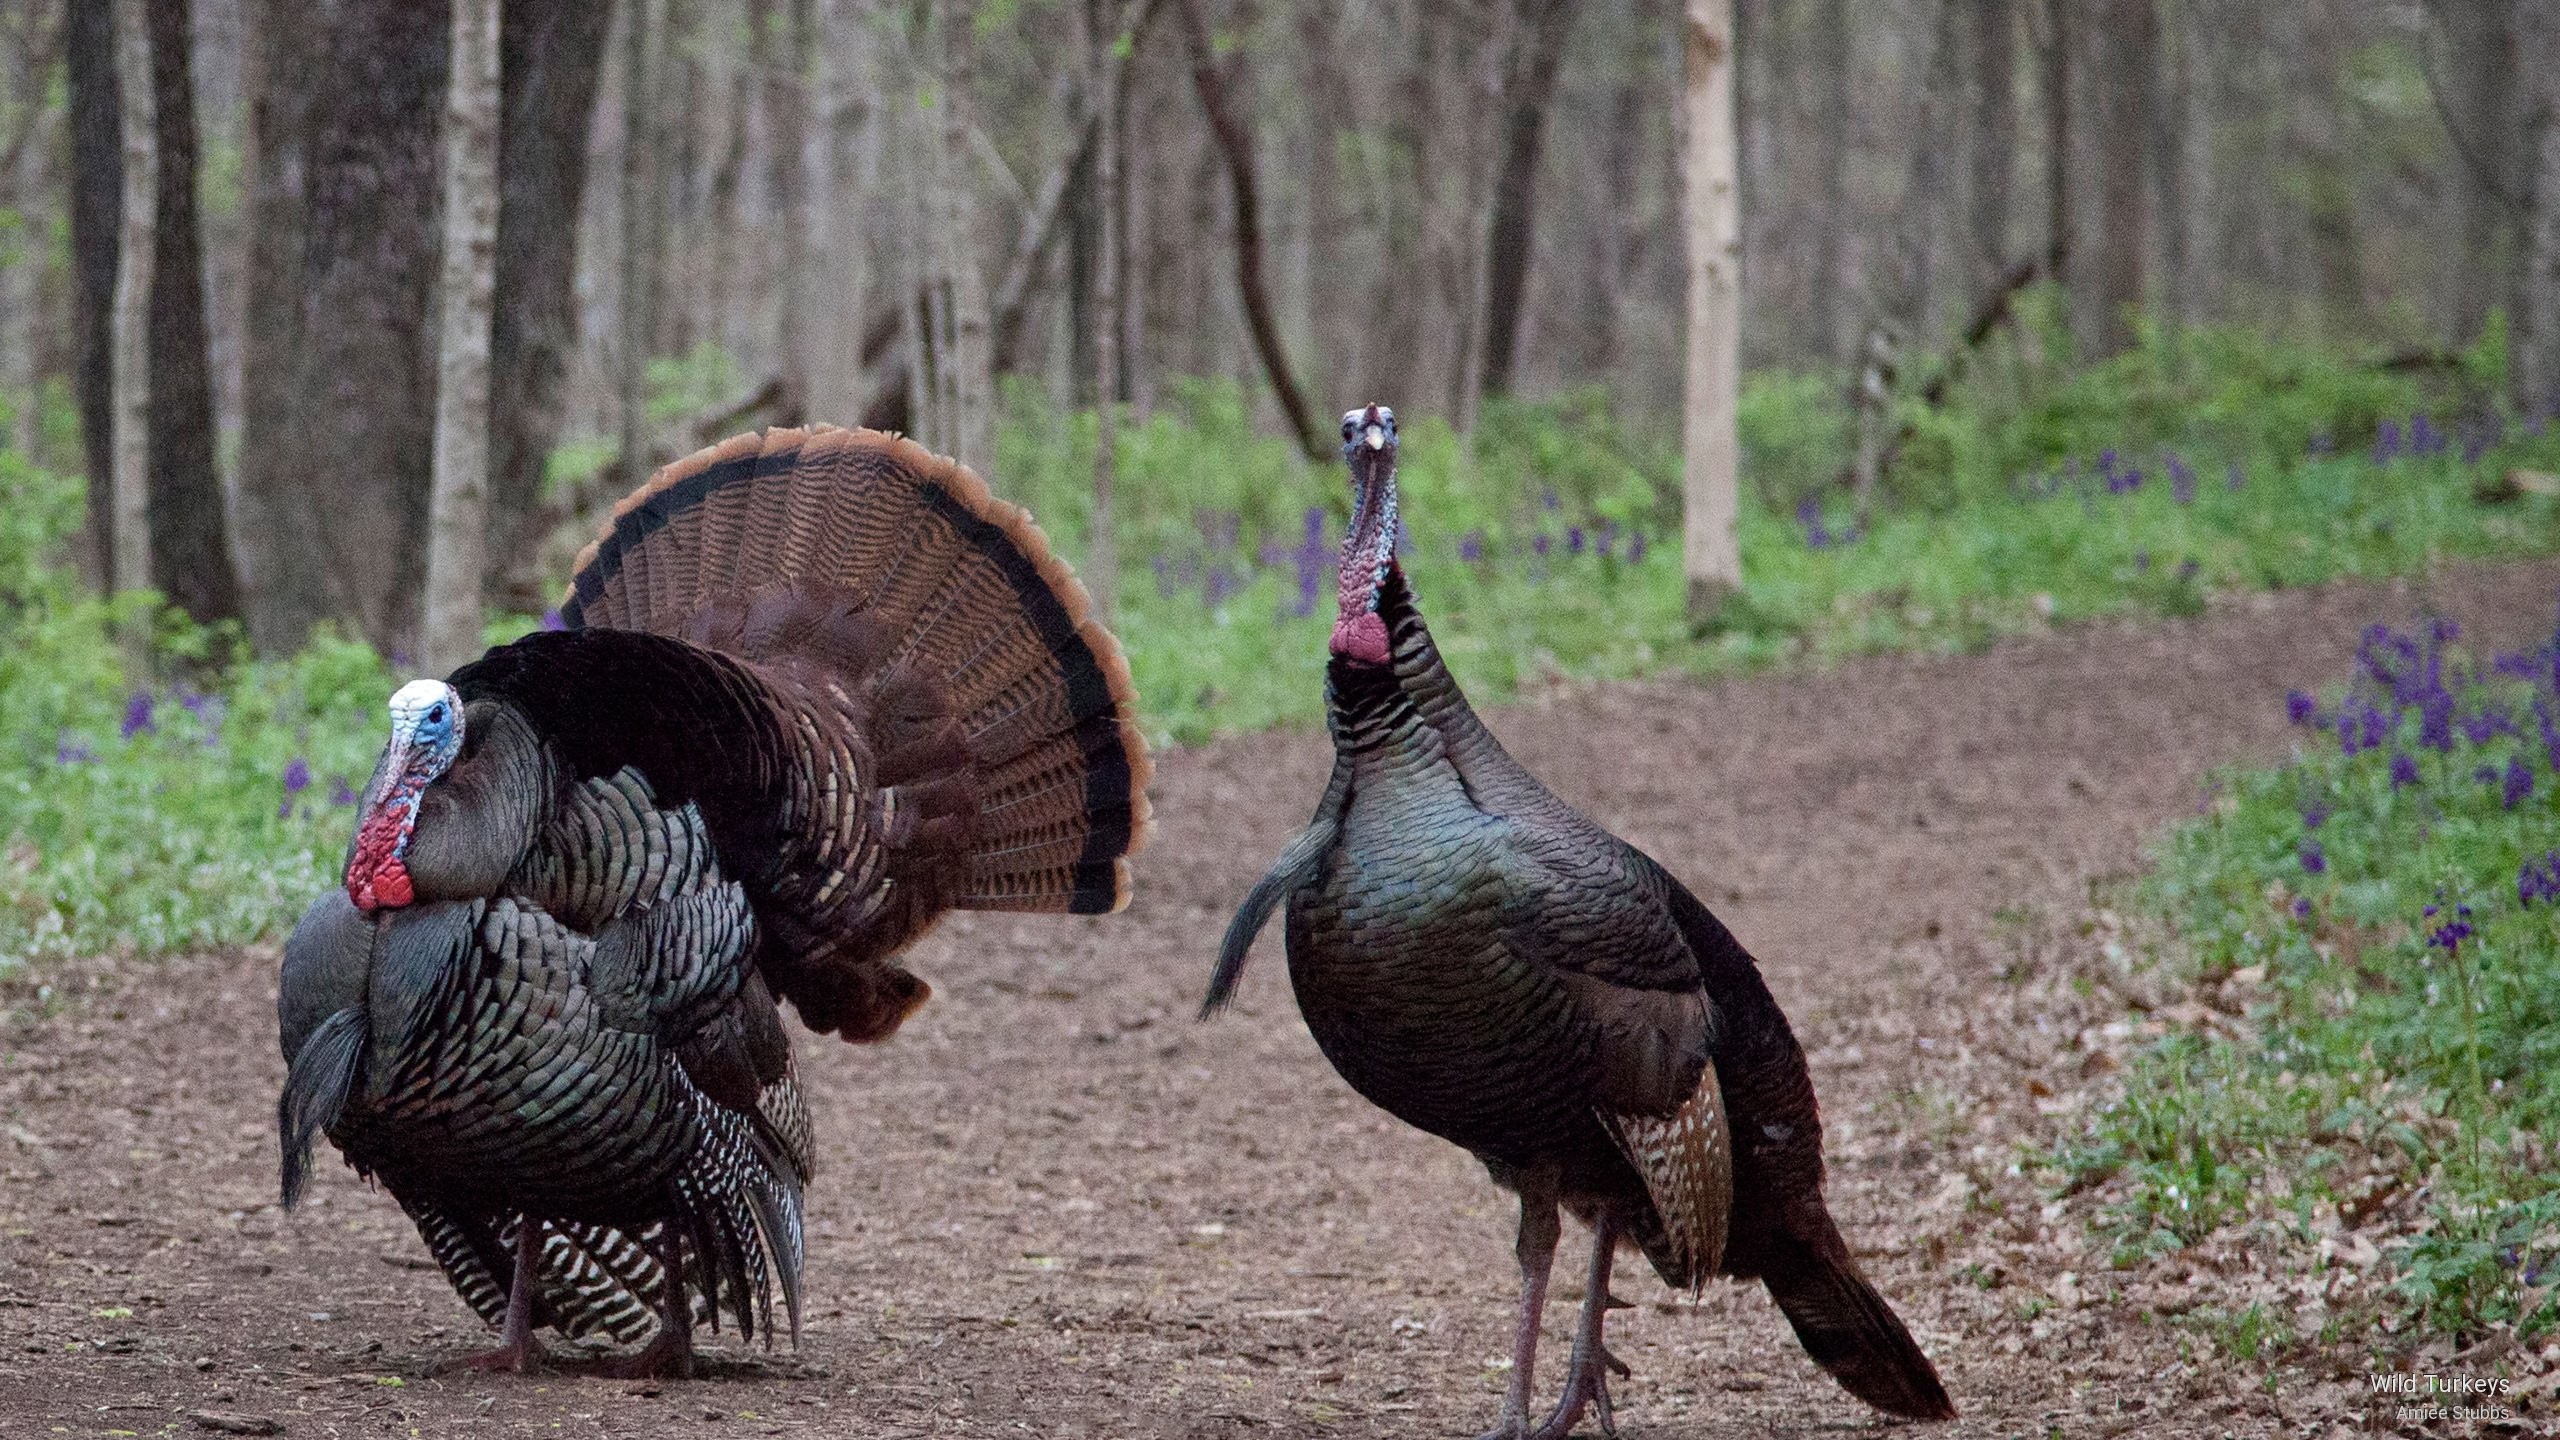 Wild Turkey Wallpapers And Screensavers.